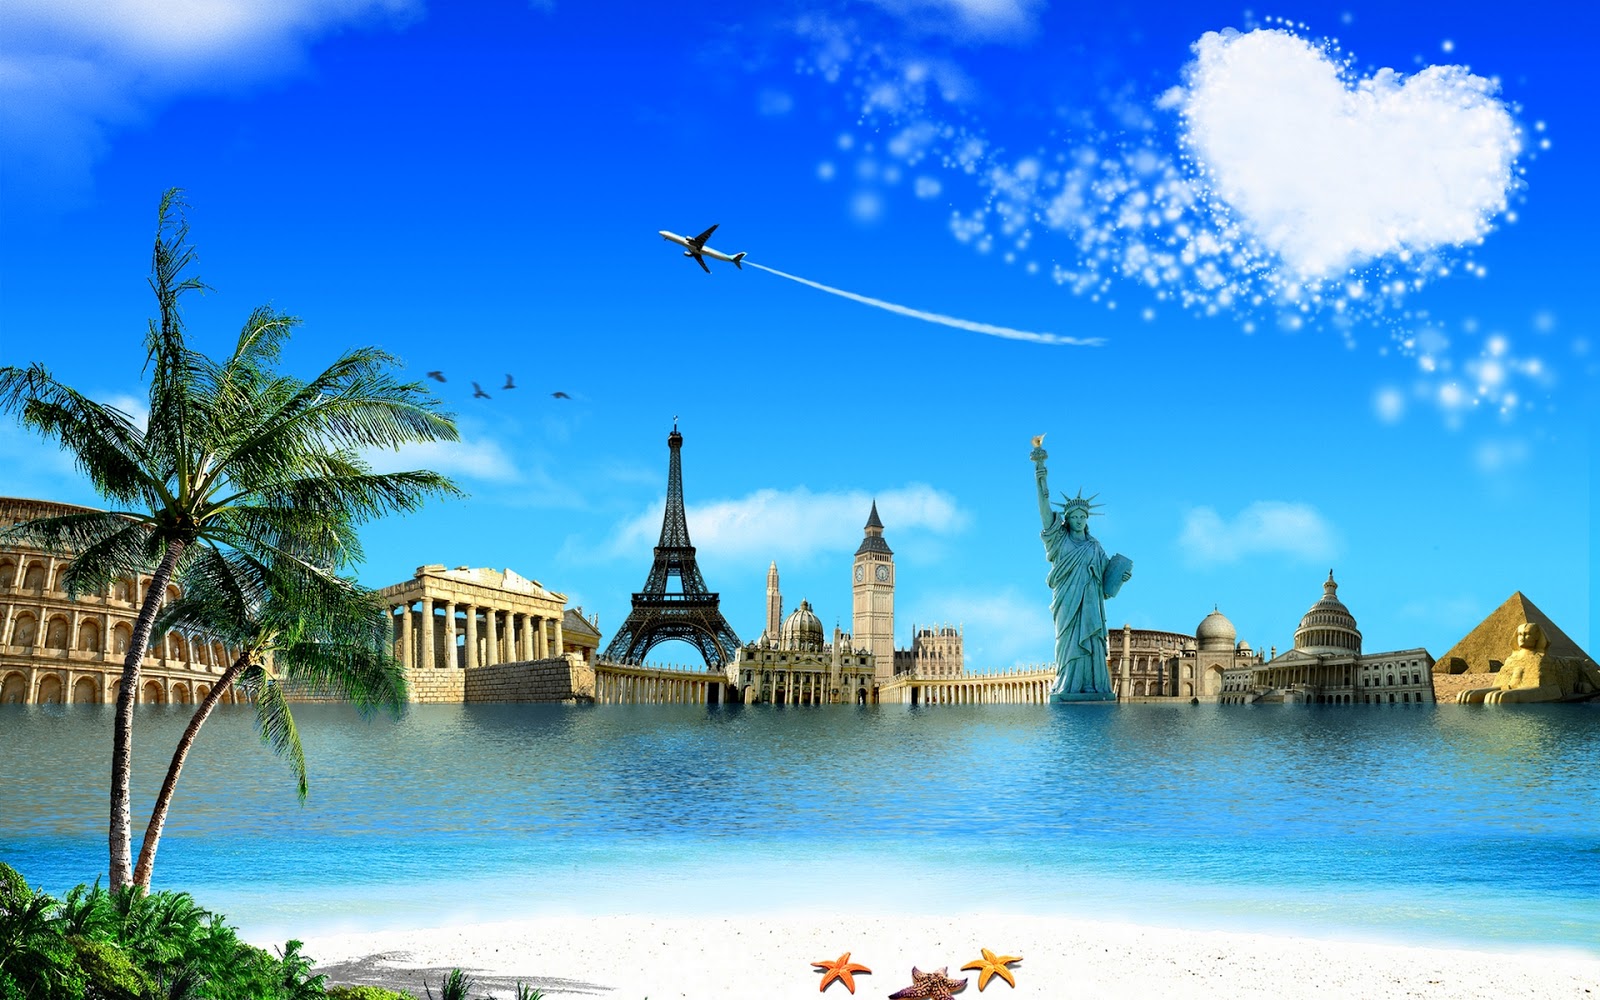 Wallpapers: New 7 Wonders Of World